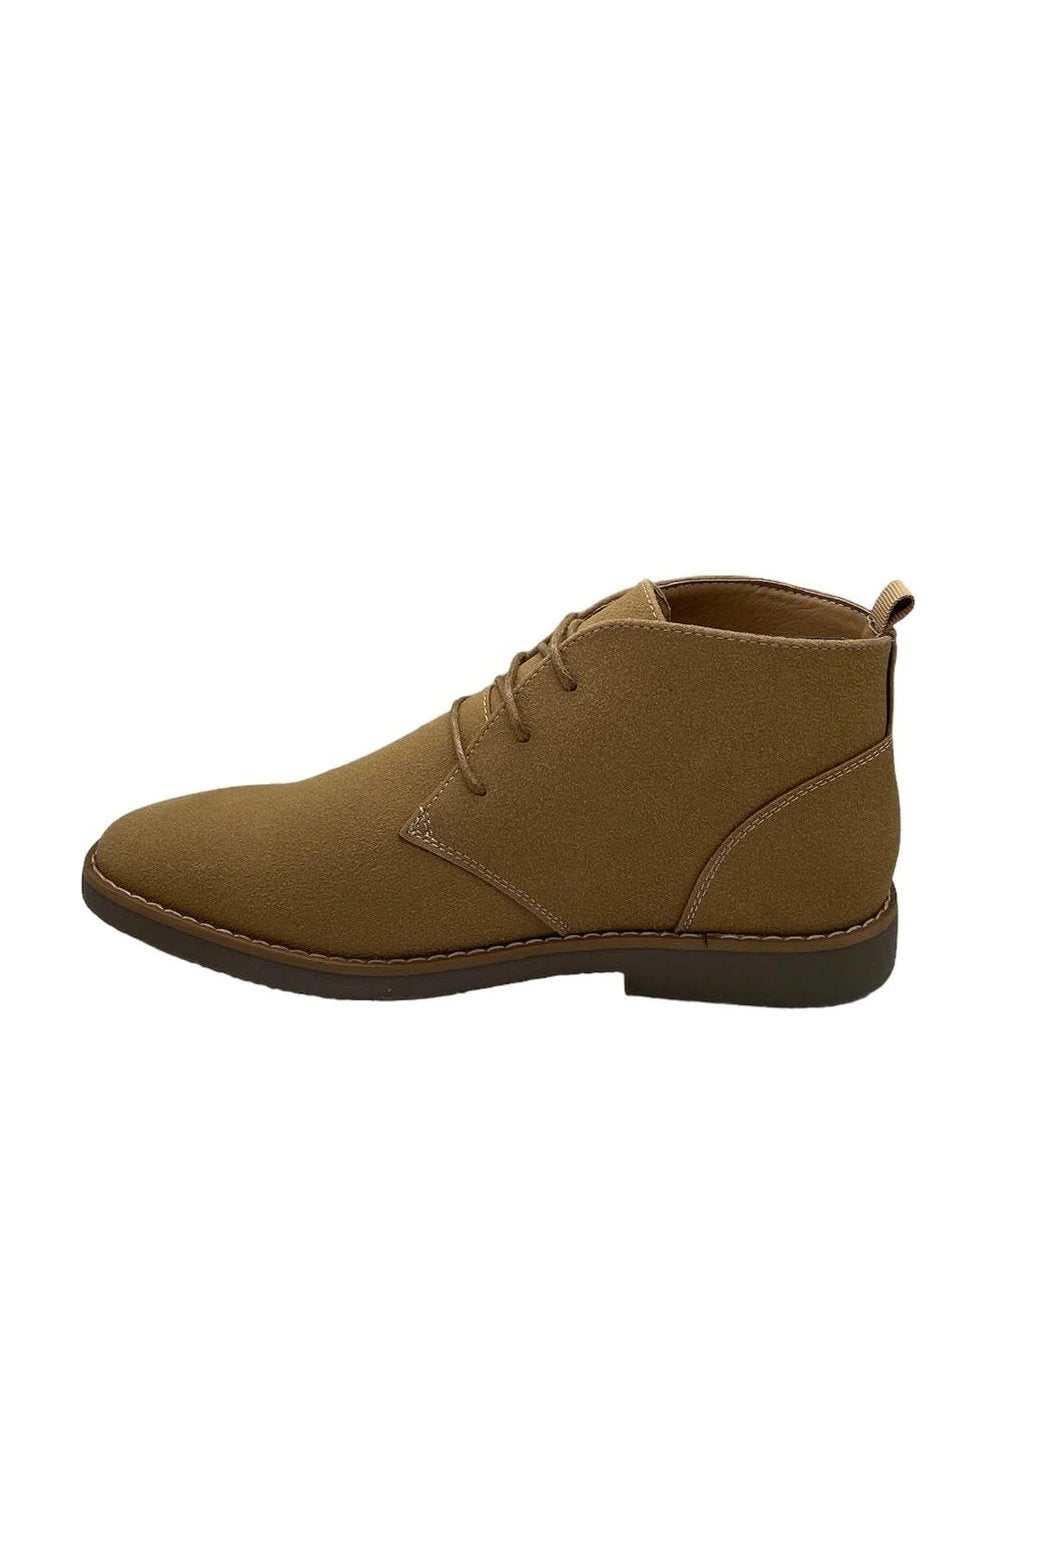 Gobi Sand Mens Lace Up Boots